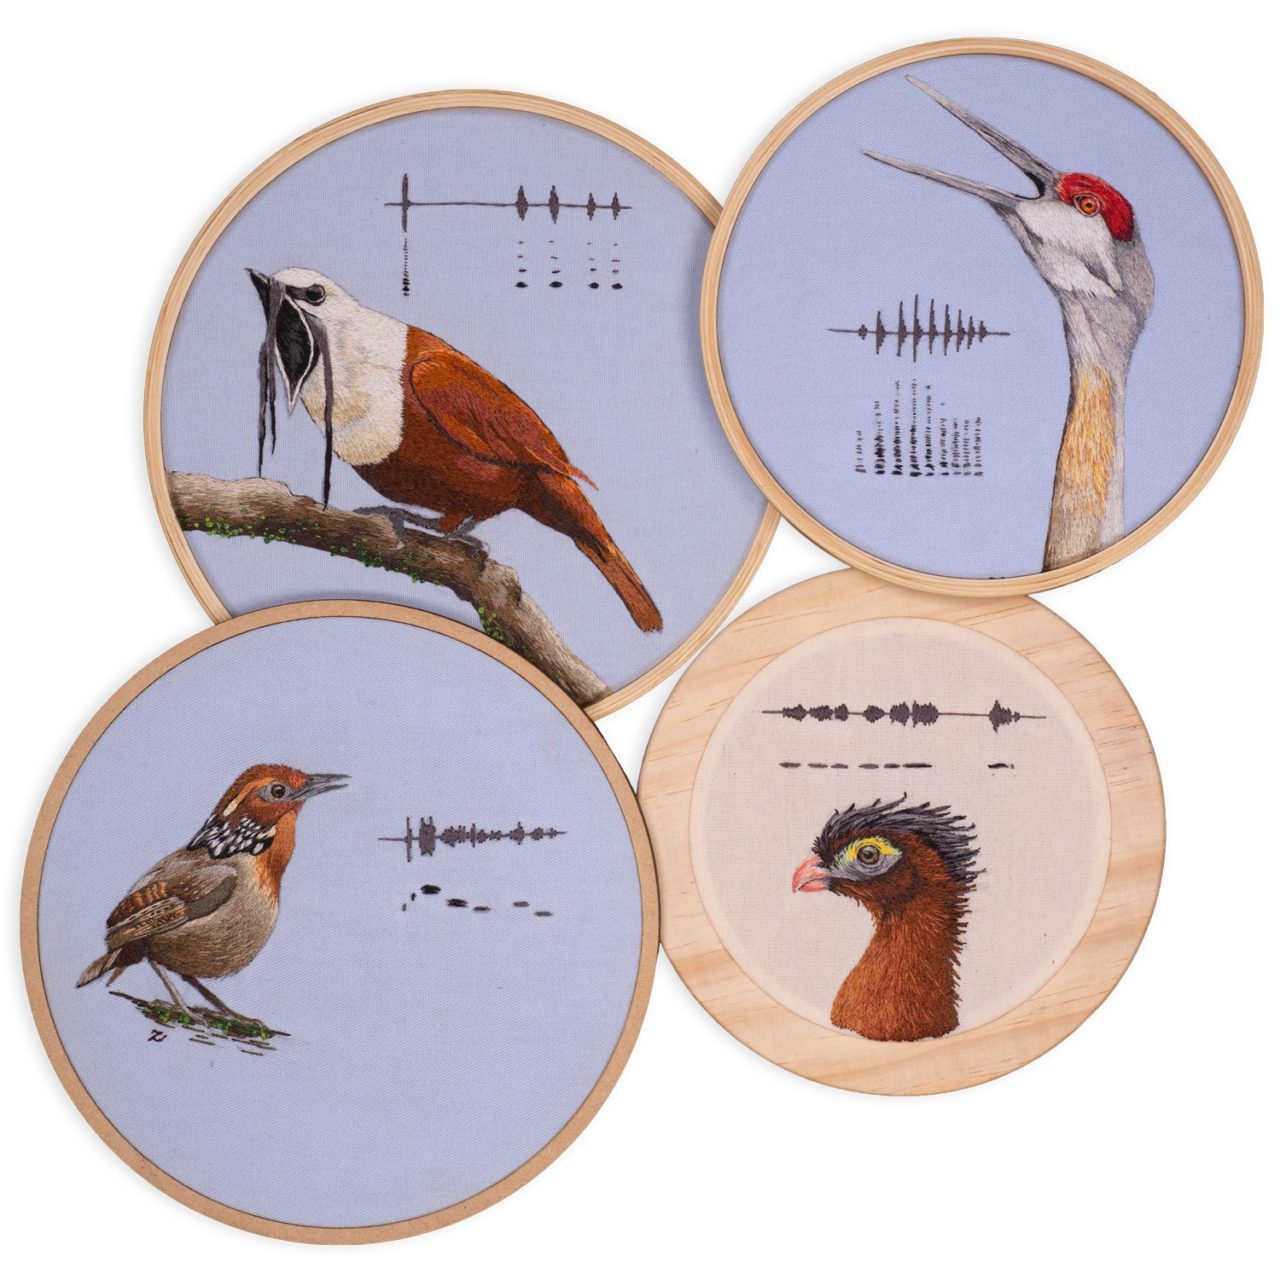 4 embroidery panels showing birds and representations of the sounds they make